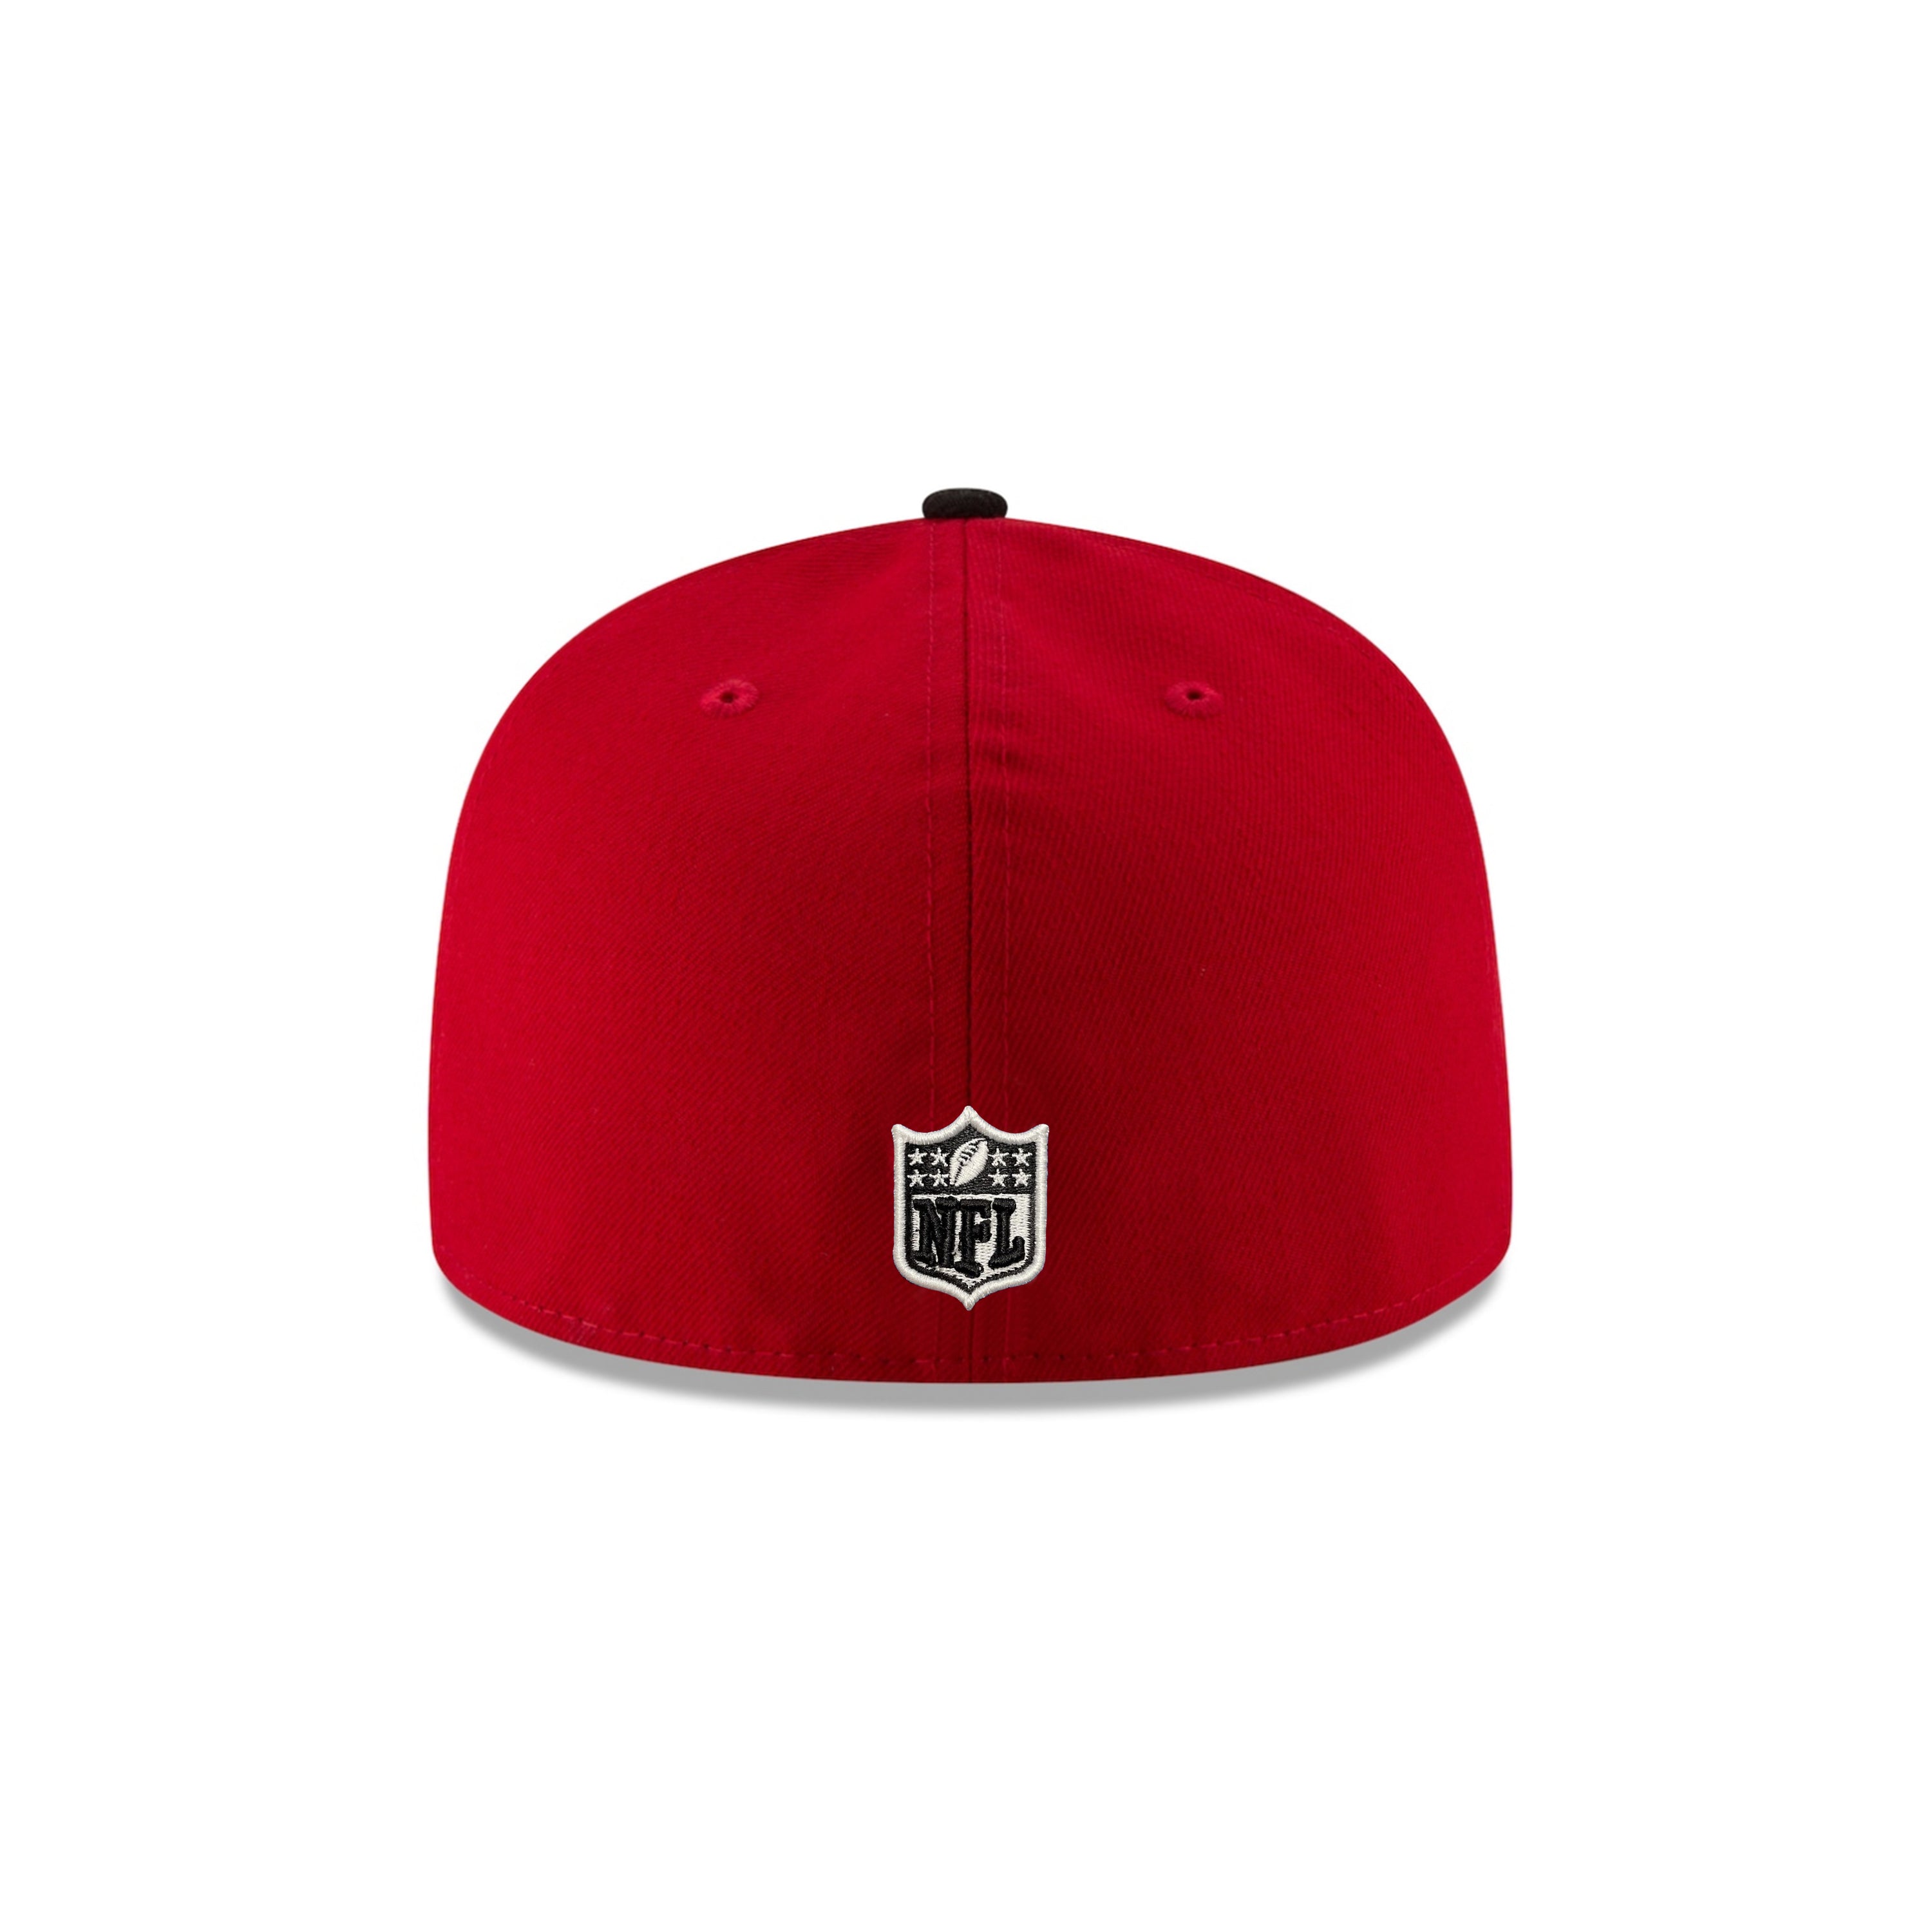 Las Vegas Raiders Scarlet Red on Black 2 Tone 59Fifty Fitted